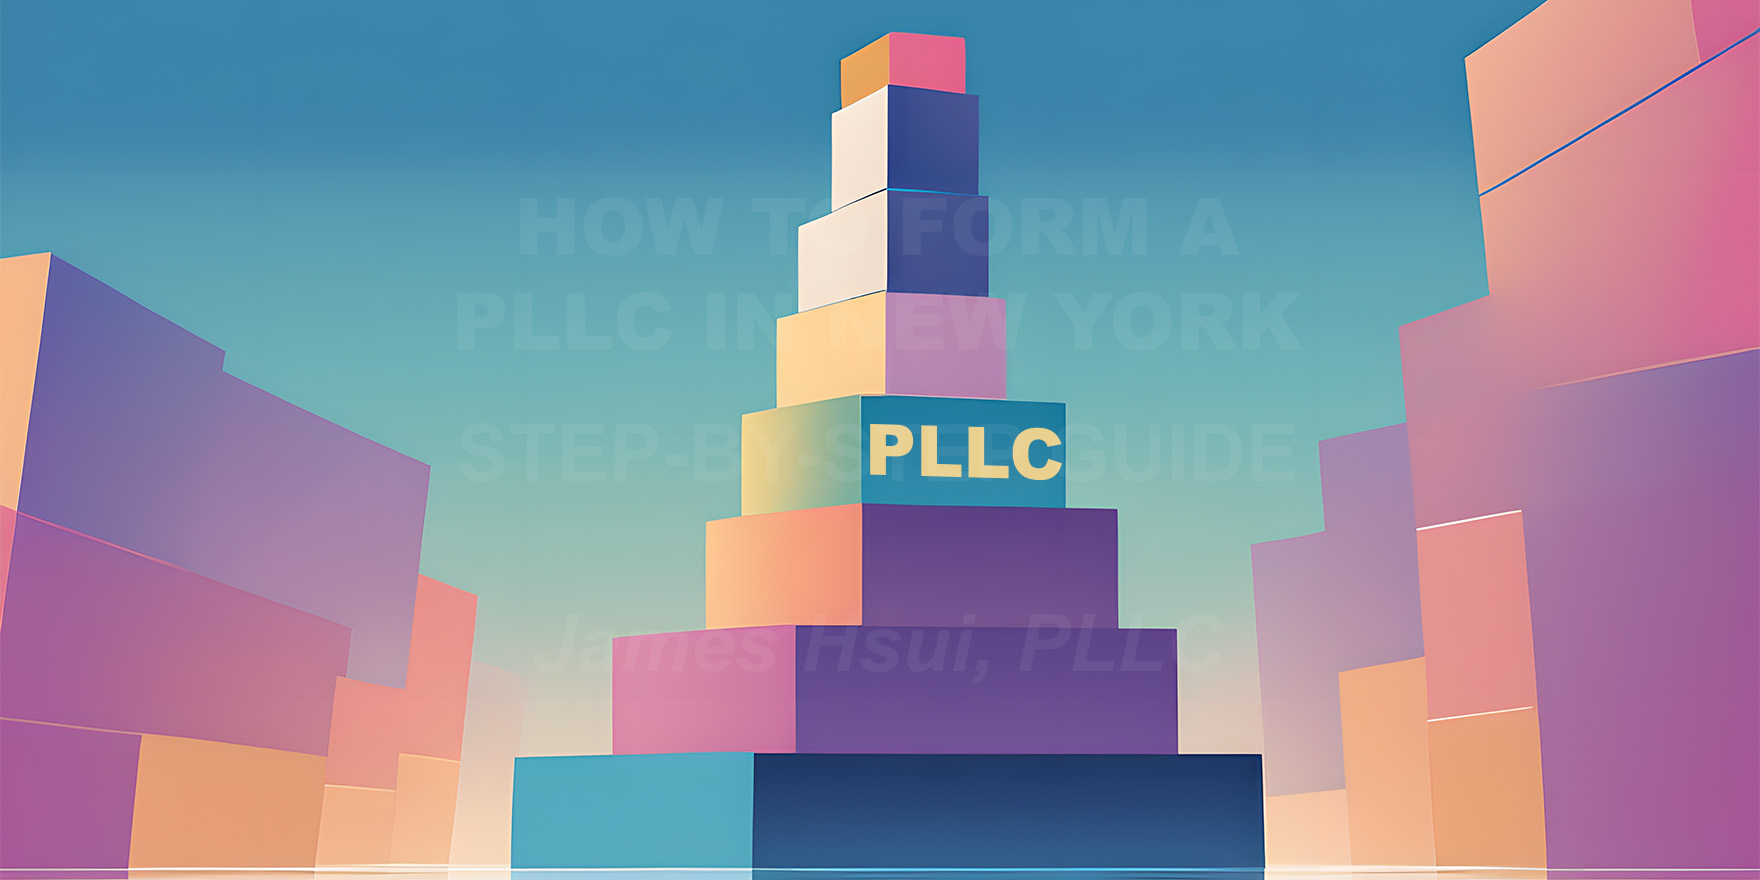 'How to Form a PLLC in New York, Step-by-Step Guide' superimposed on an blocks shaped into a pyramid with 'PLLC' in the middle block